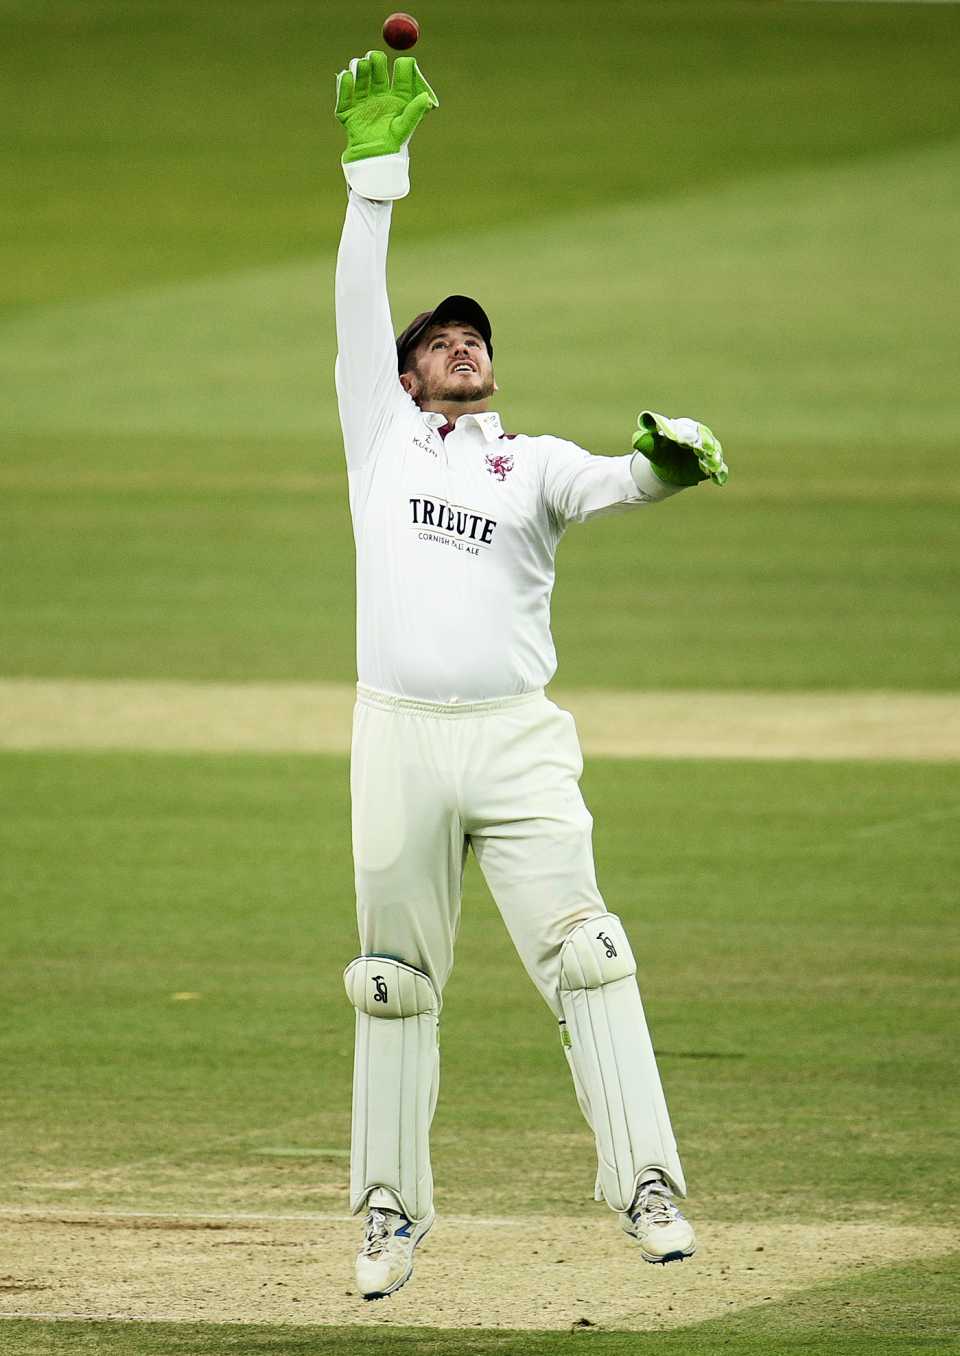 Steven Davies looks to catch the ball, Somerset vs Essex, Bob Willis Trophy final, 5th day, Lord's, September 27, 2020